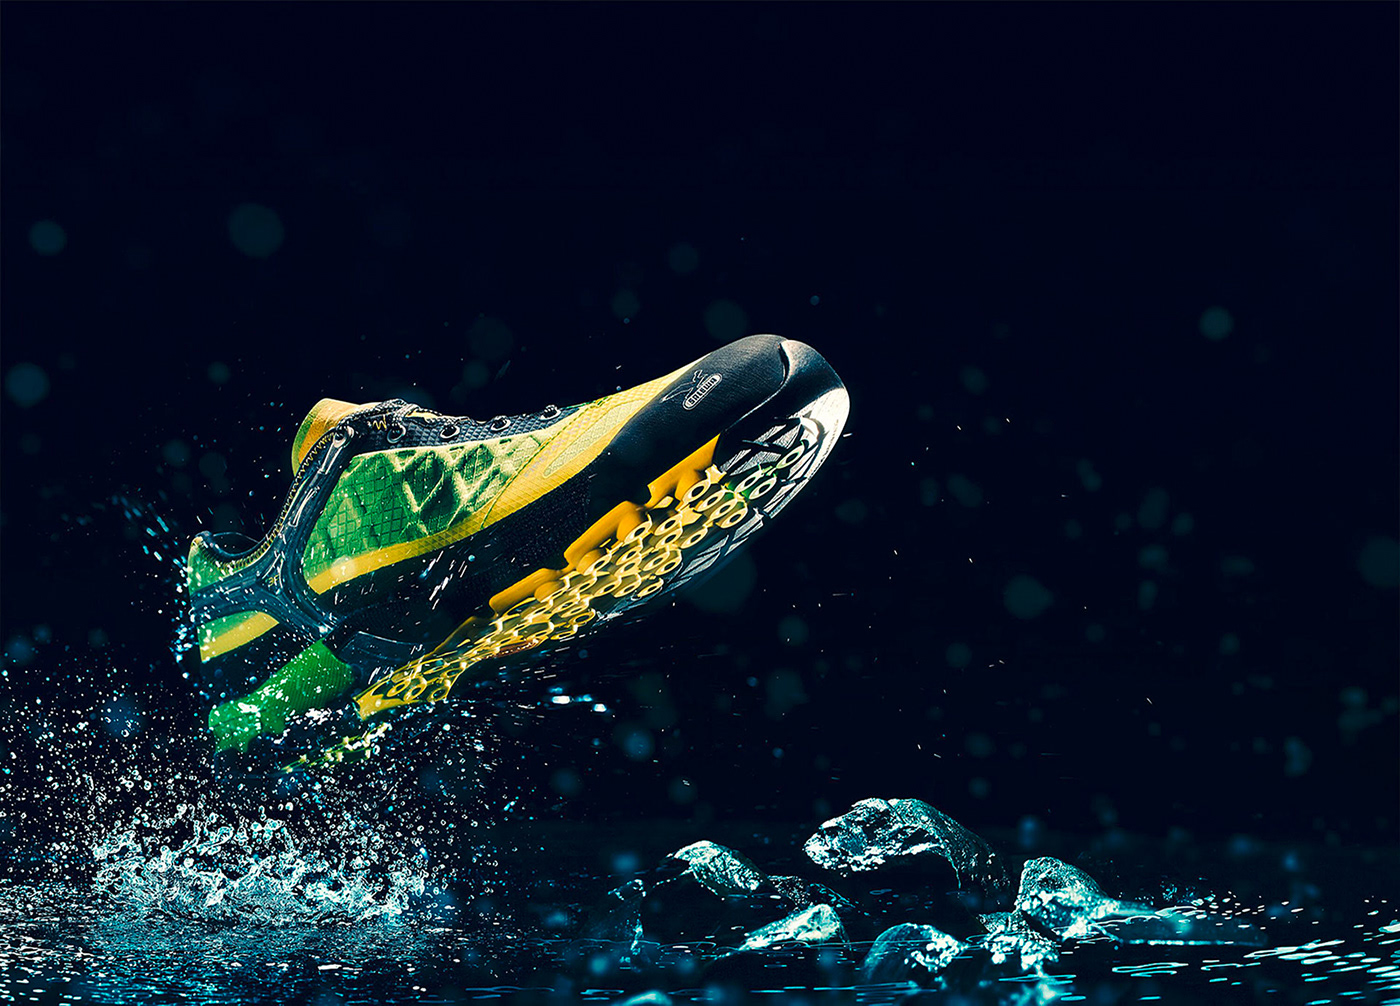 dirt hollow Imaging mountain retouch running Salewa specialeffects sports water